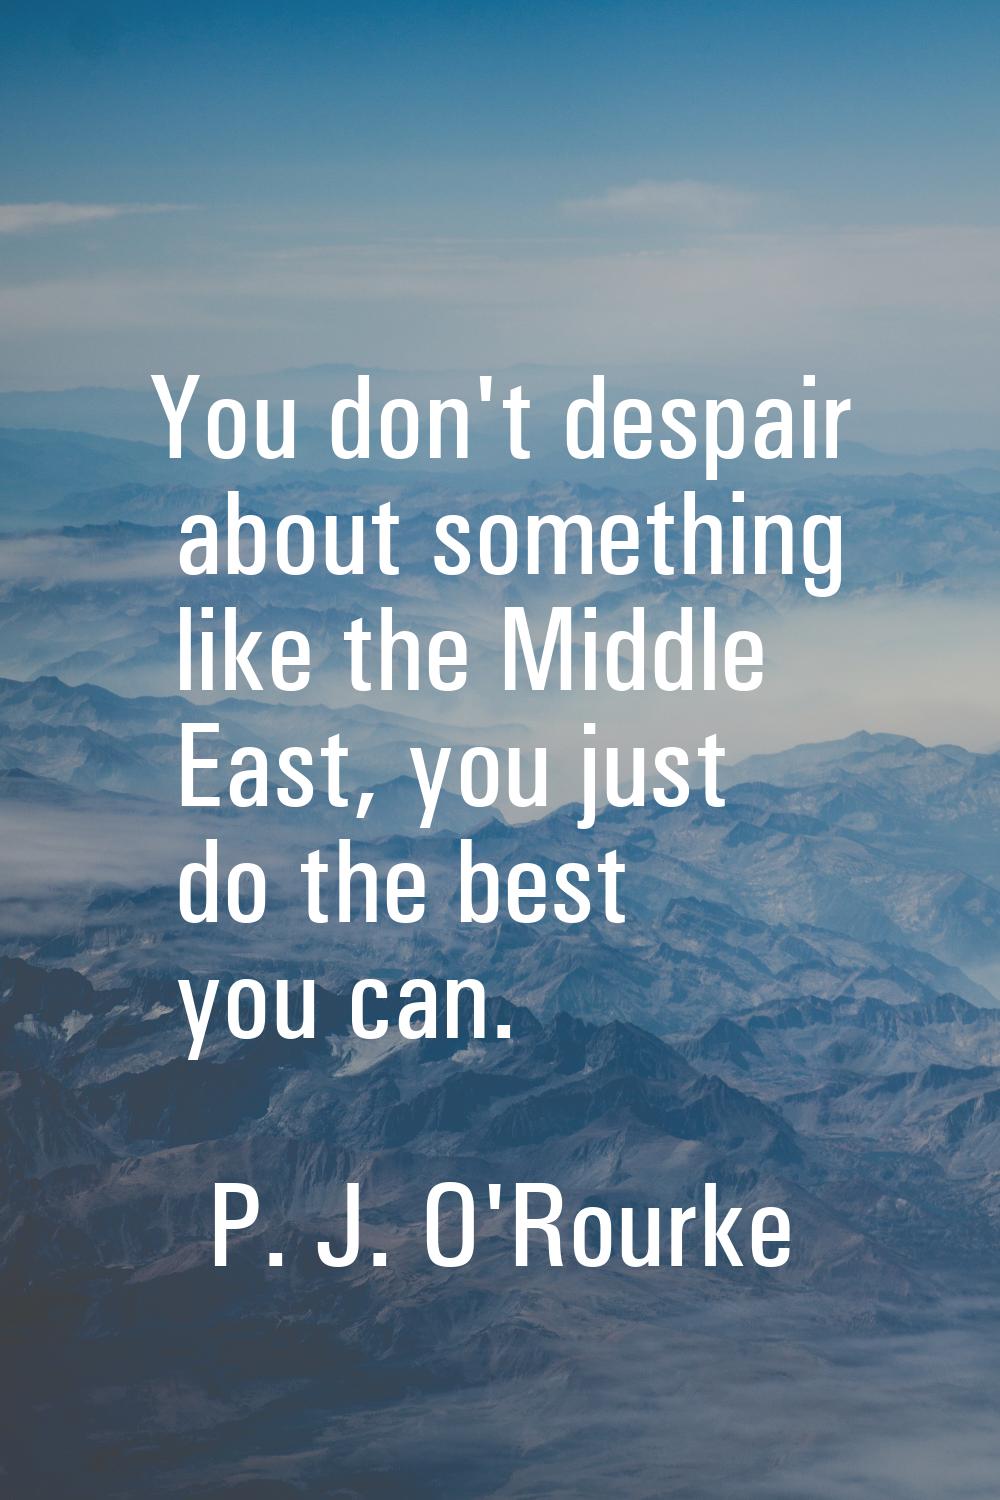 You don't despair about something like the Middle East, you just do the best you can.